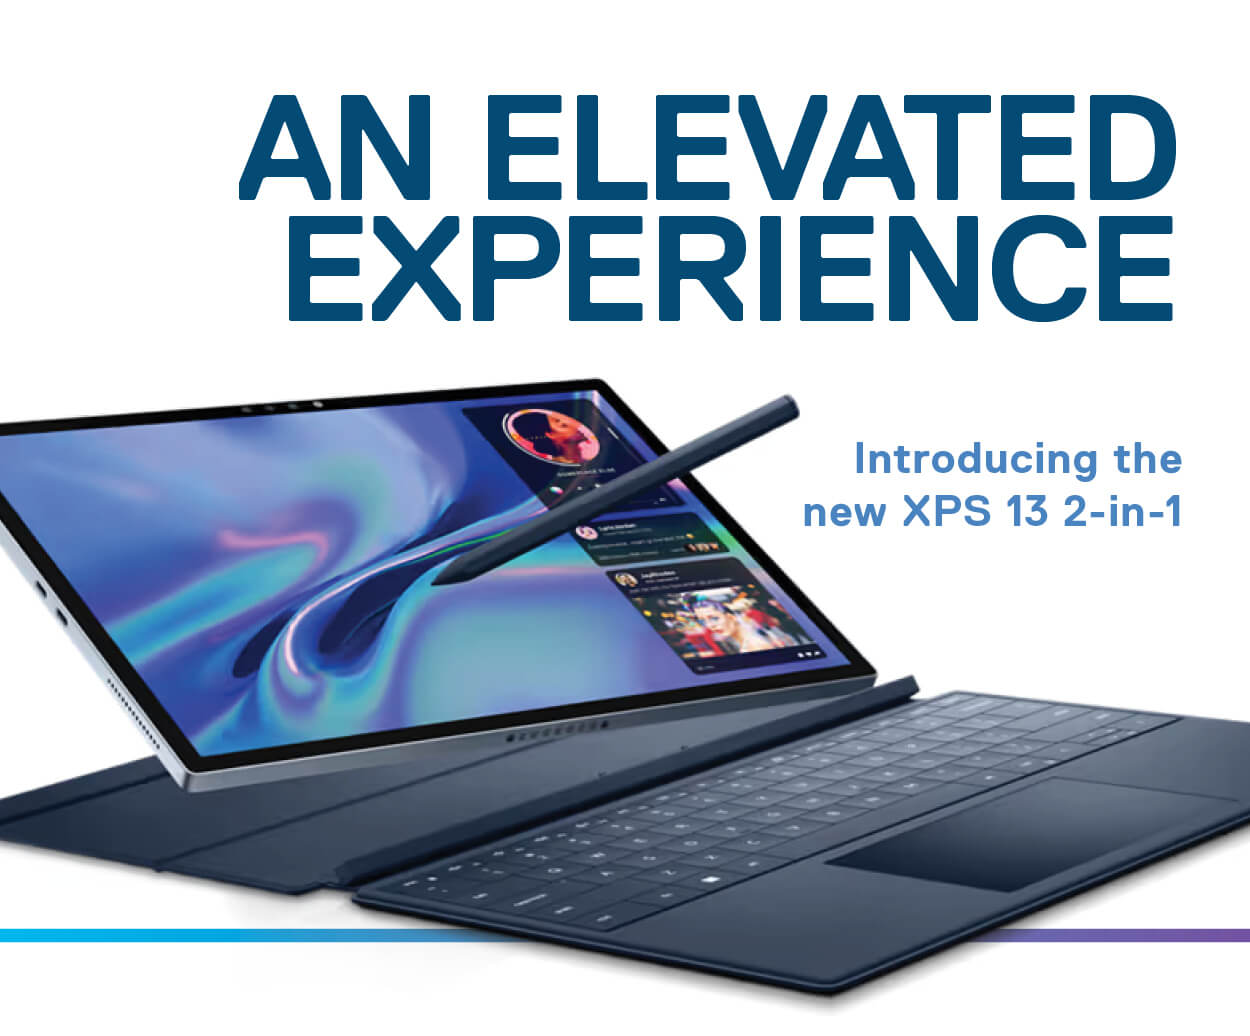 An elevated experience. Introducing the new XPS 13 2-in-1.